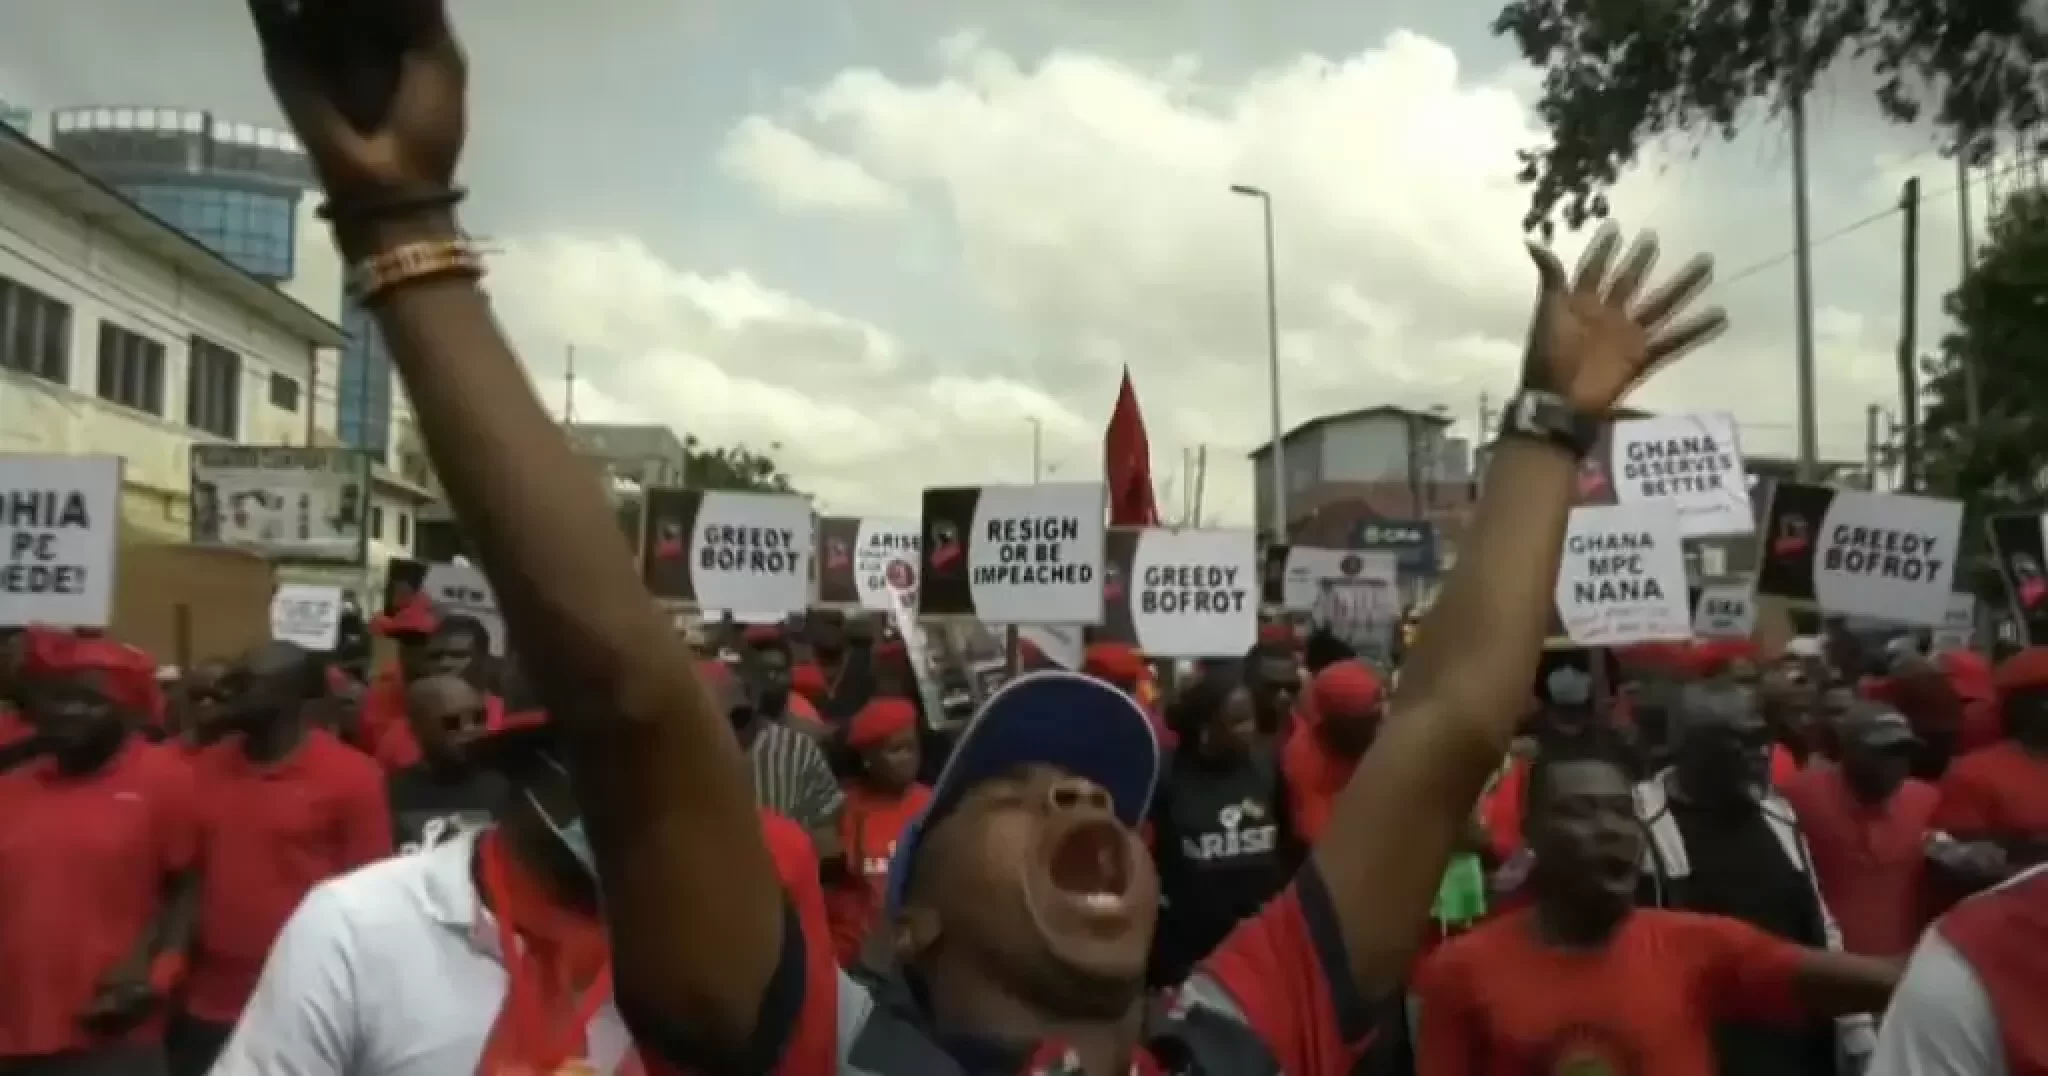 Ghanaians take to the streets demanding resignation of President Akufo-Addo